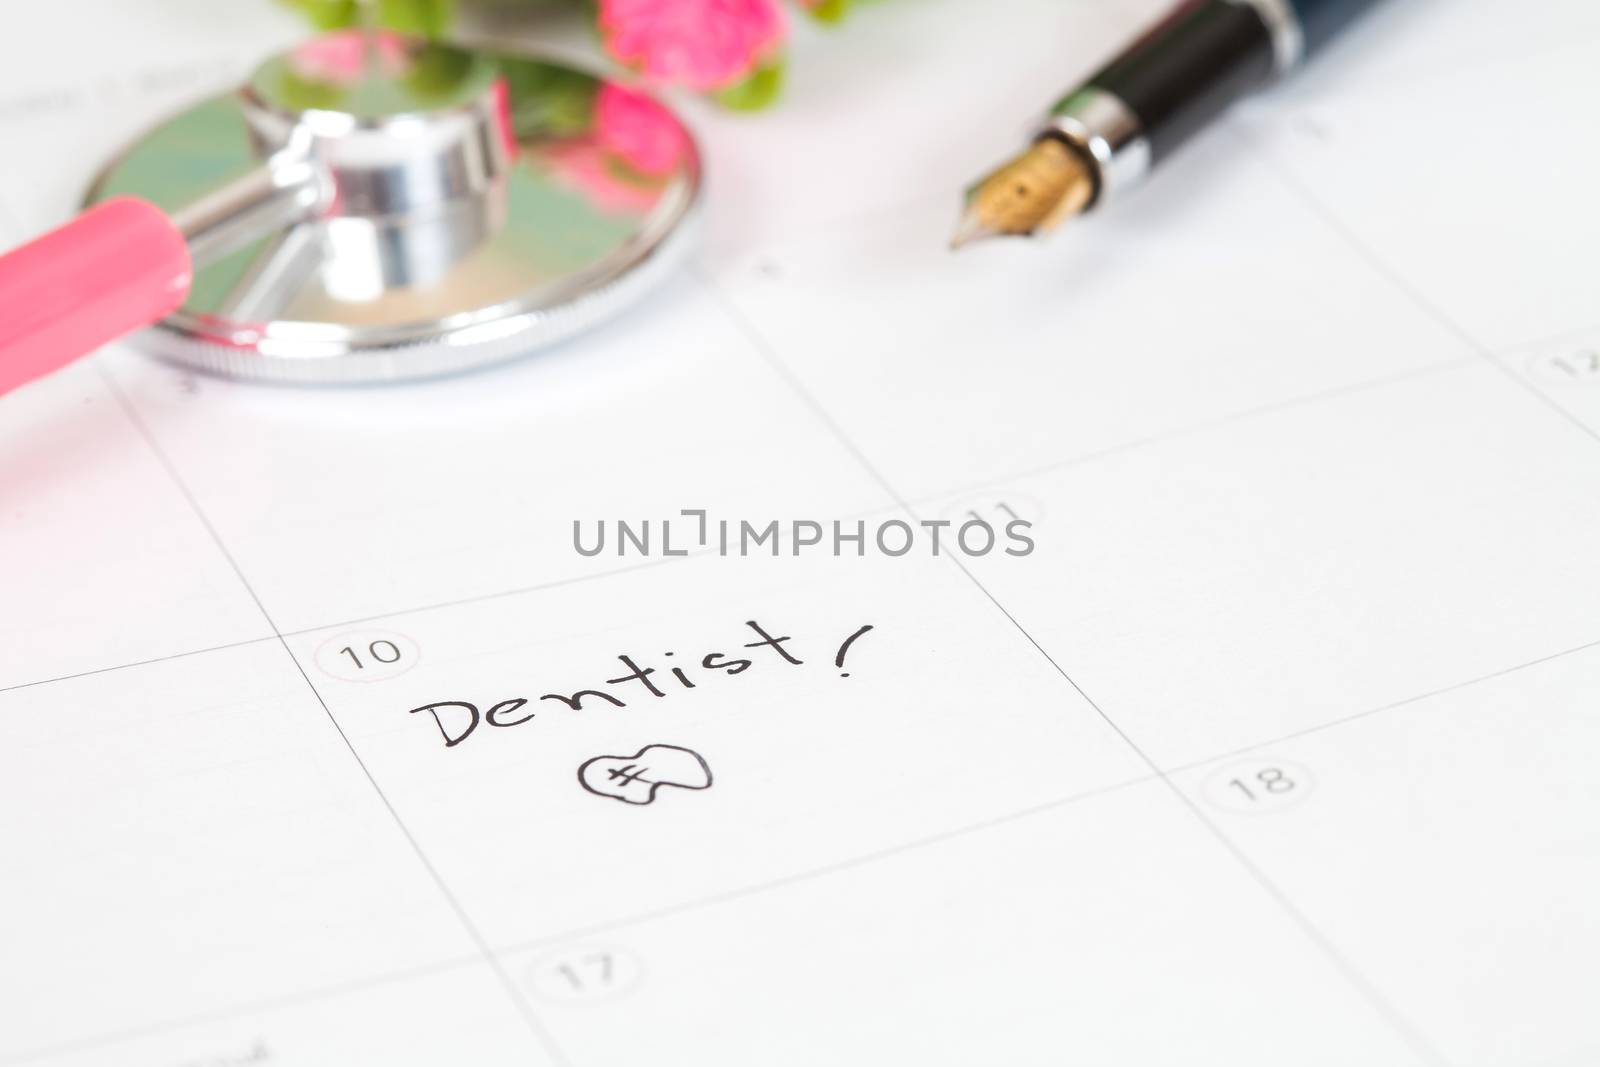 Reminder "Dentist appointment" in calendar  by amnarj2006